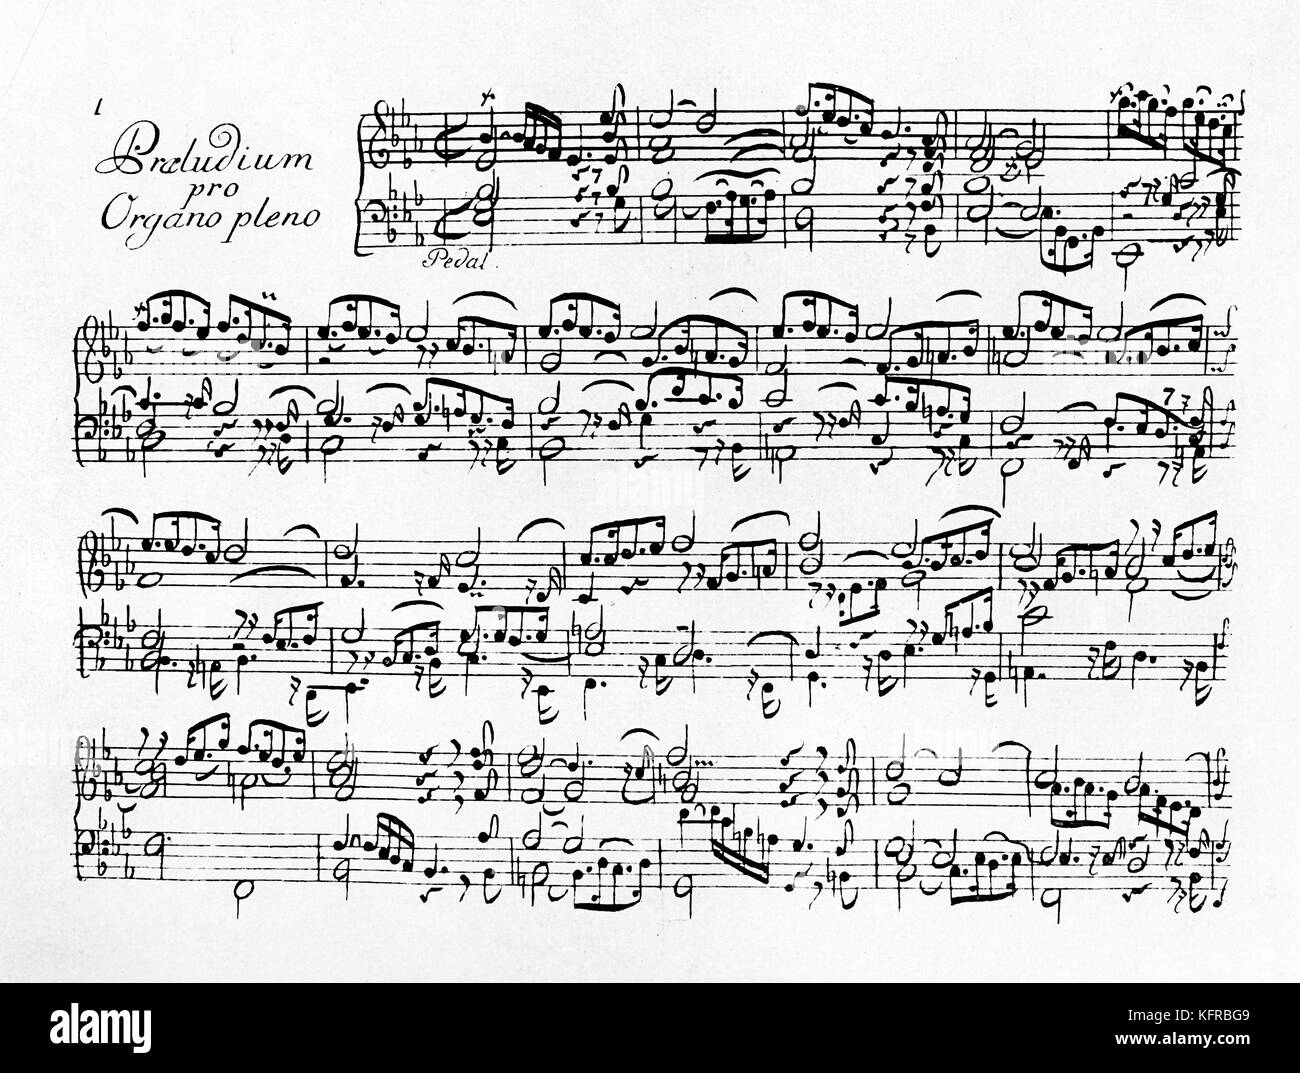 Johann Sebastian Bach: Score page of Praludium pro Organo Pleno from third volume of Clavier Ubung.the Präludium opens the Clavier Ubung and the Fugue in Es dur closes it. .  J S Bach, c.1735.  German composer & organist, 21 March 1685 - 28 July 1750 Stock Photo